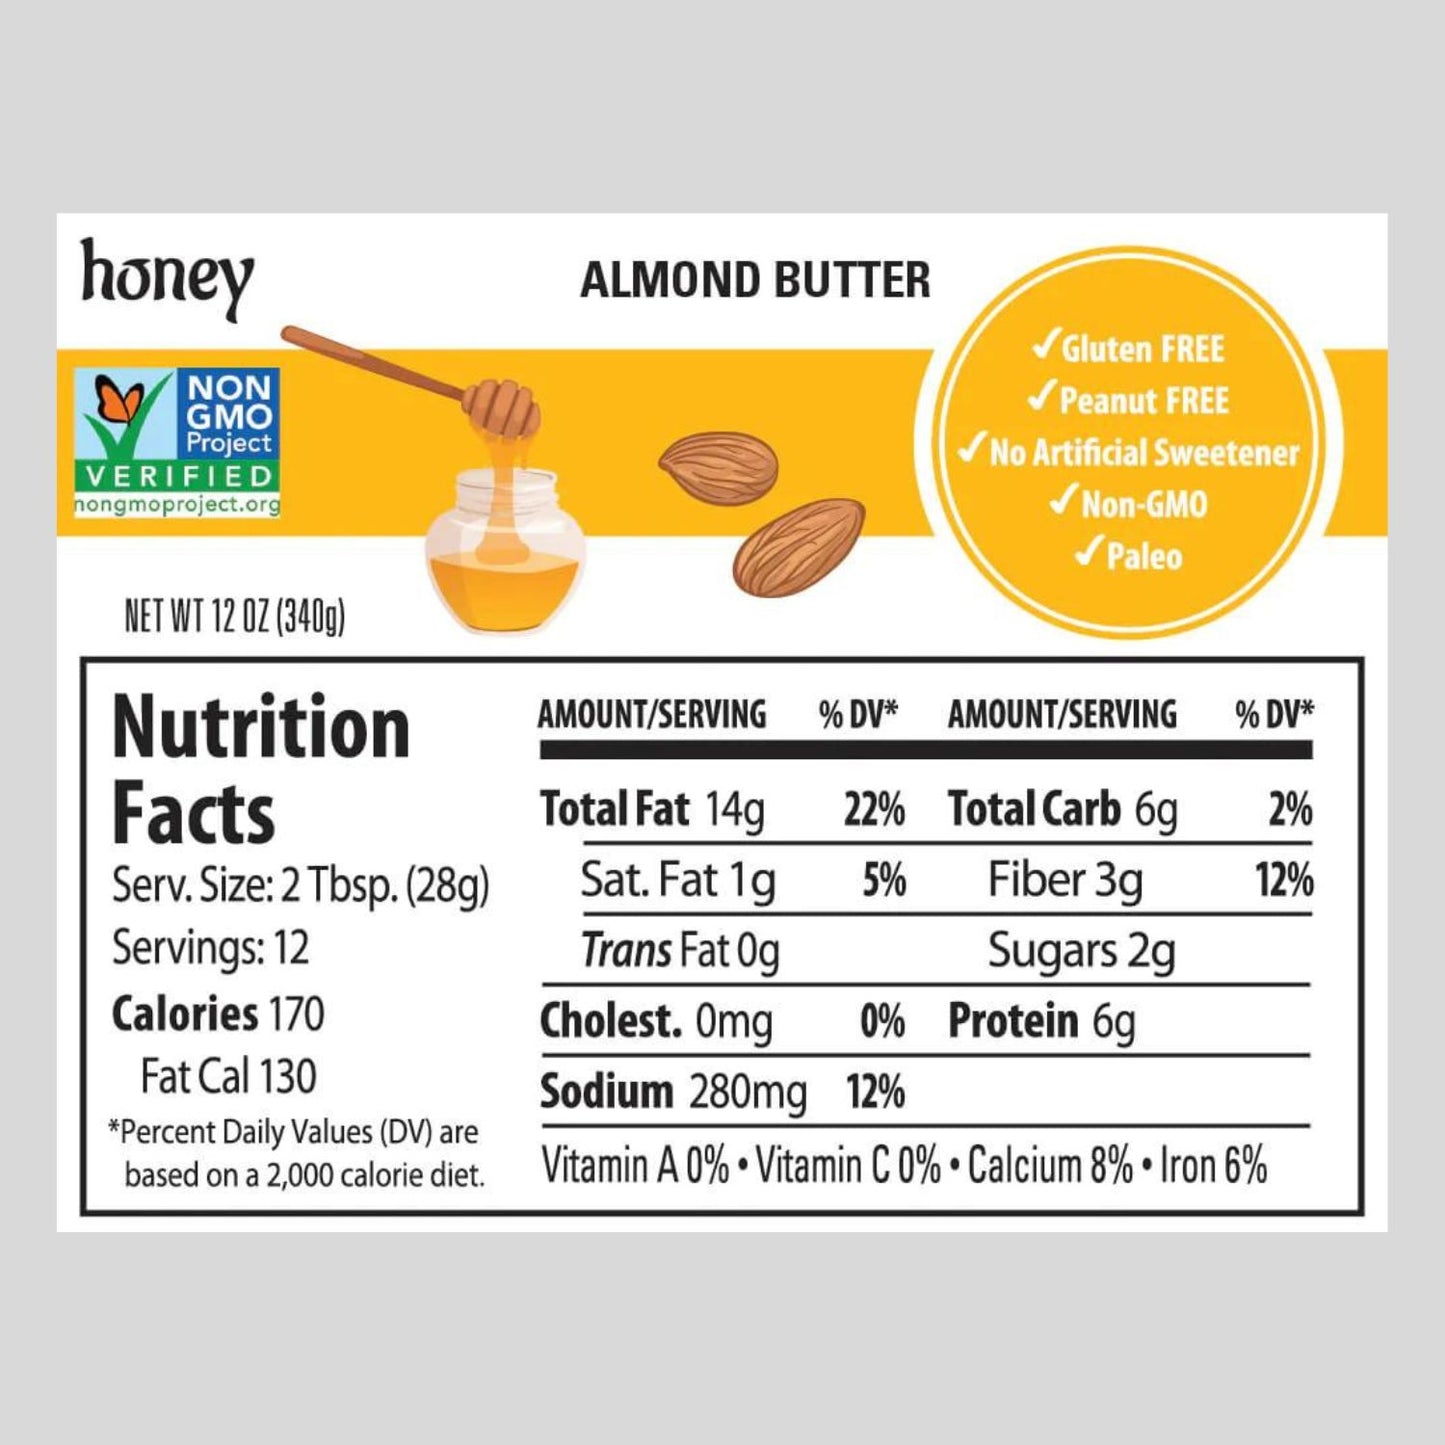 FLAVOR OF THE MONTH! - Honey Almond Butter